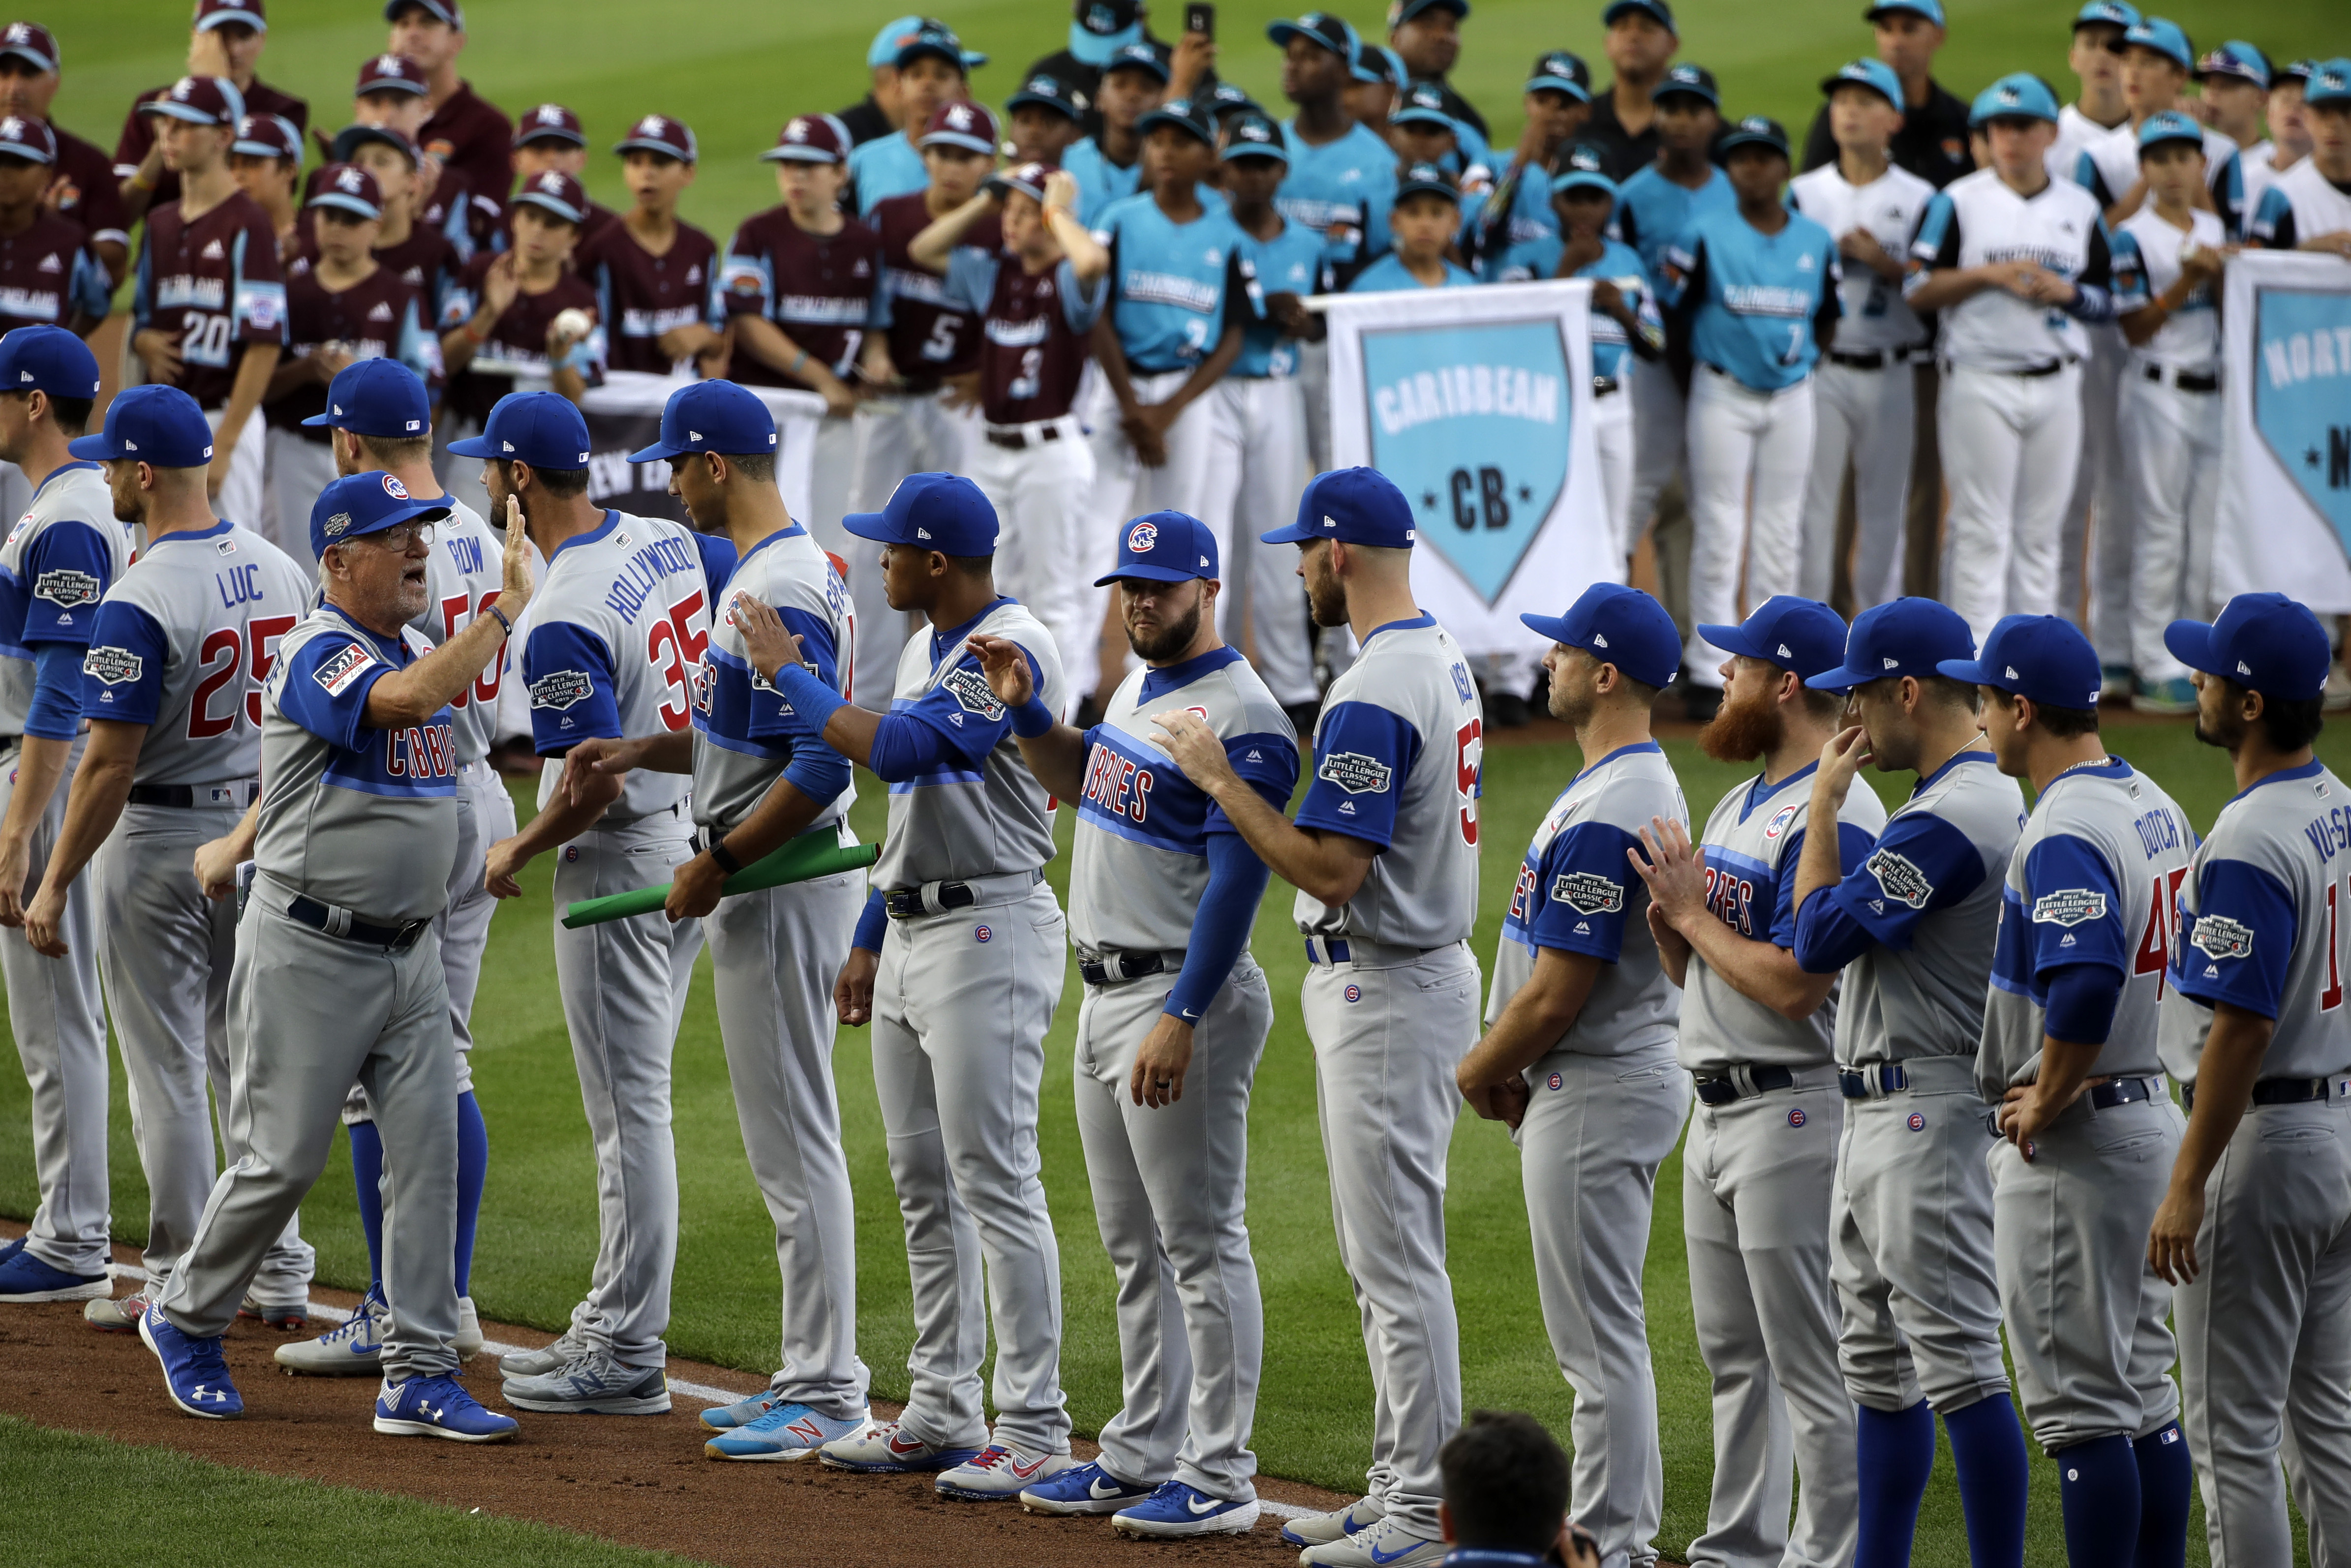 2021 Little League Baseball and Softball World Series to Honor Icons of the  Game, The 2021 Little League Baseball and Softball World Series will honor  icons of the game